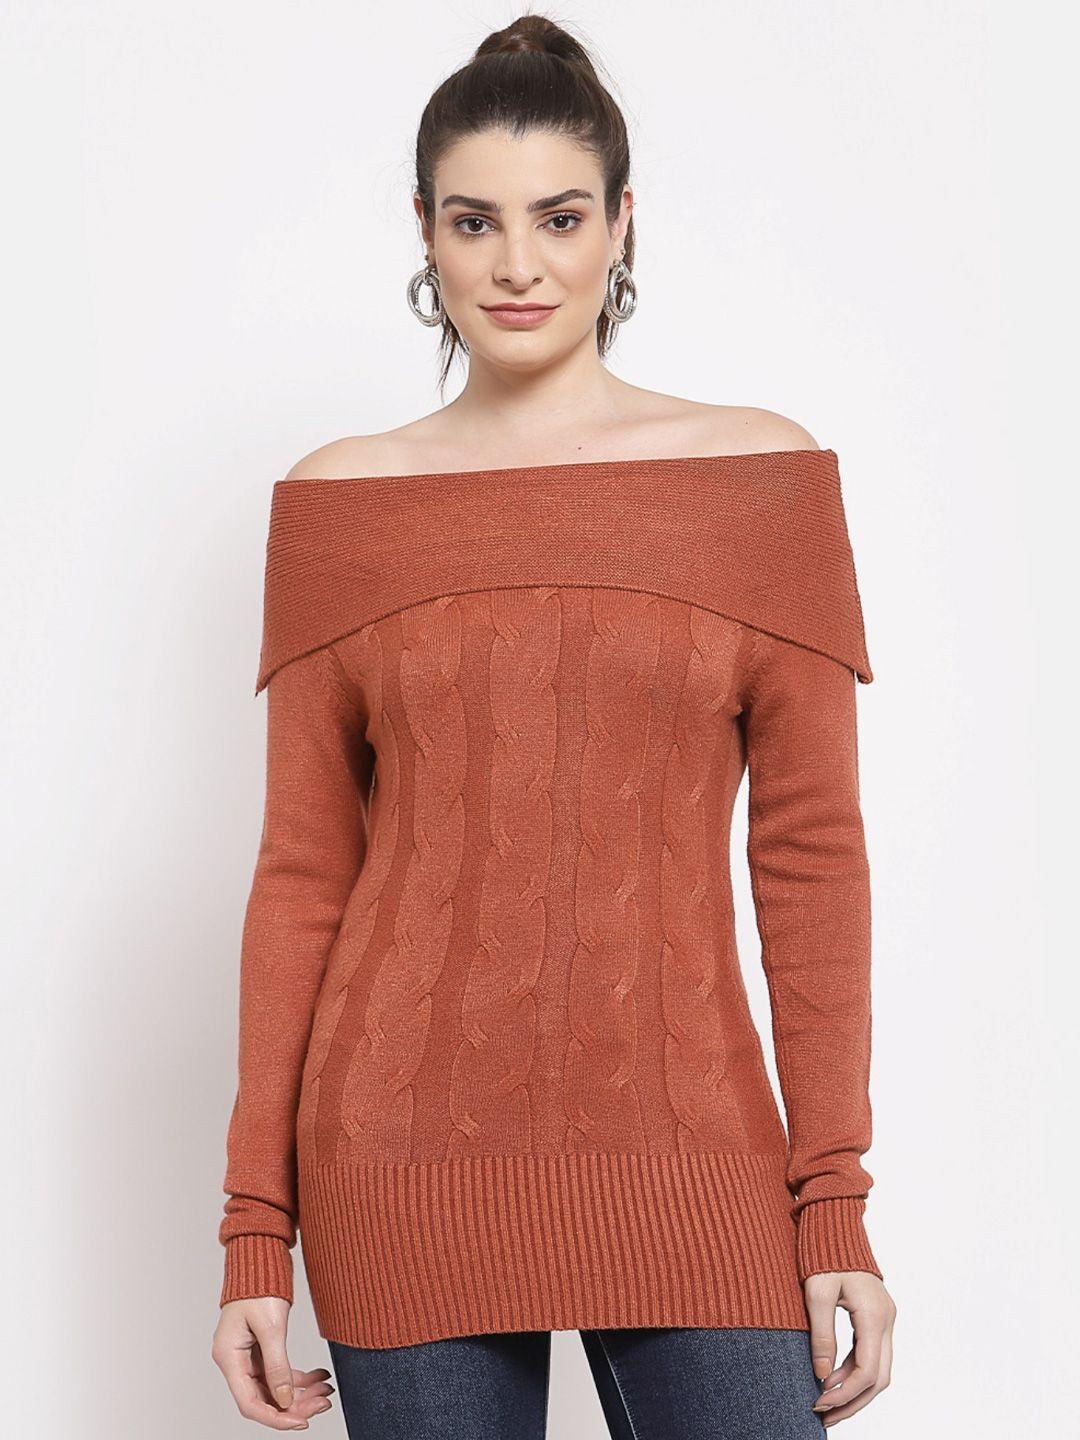 mafadeny-women-cable-knit-pullover